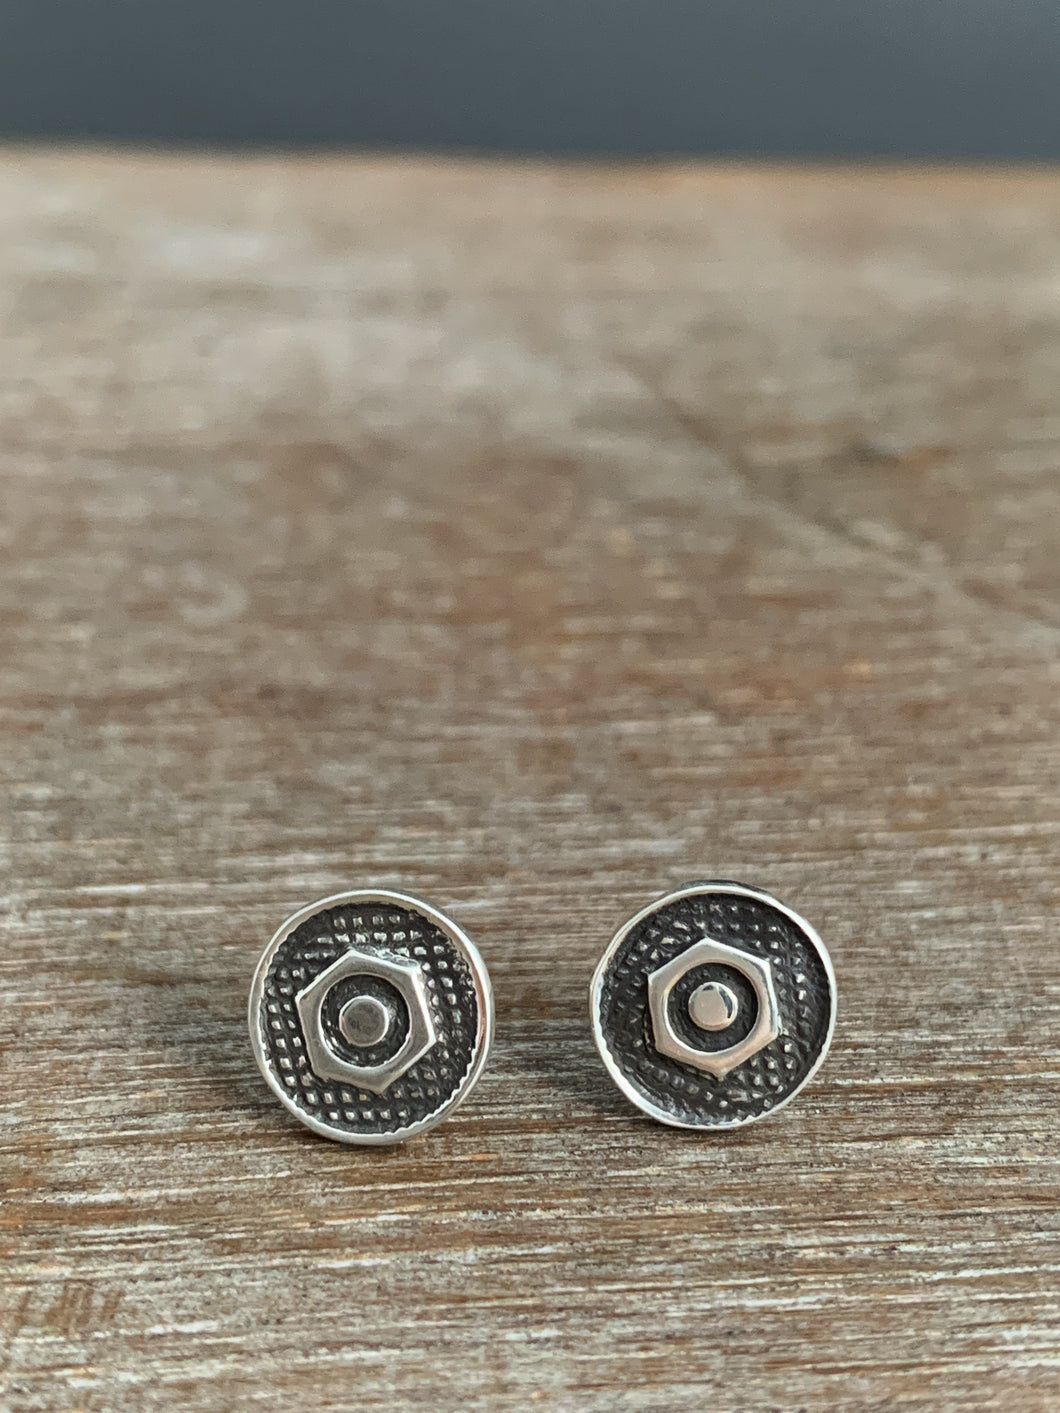 Nuts and bolts stud earrings